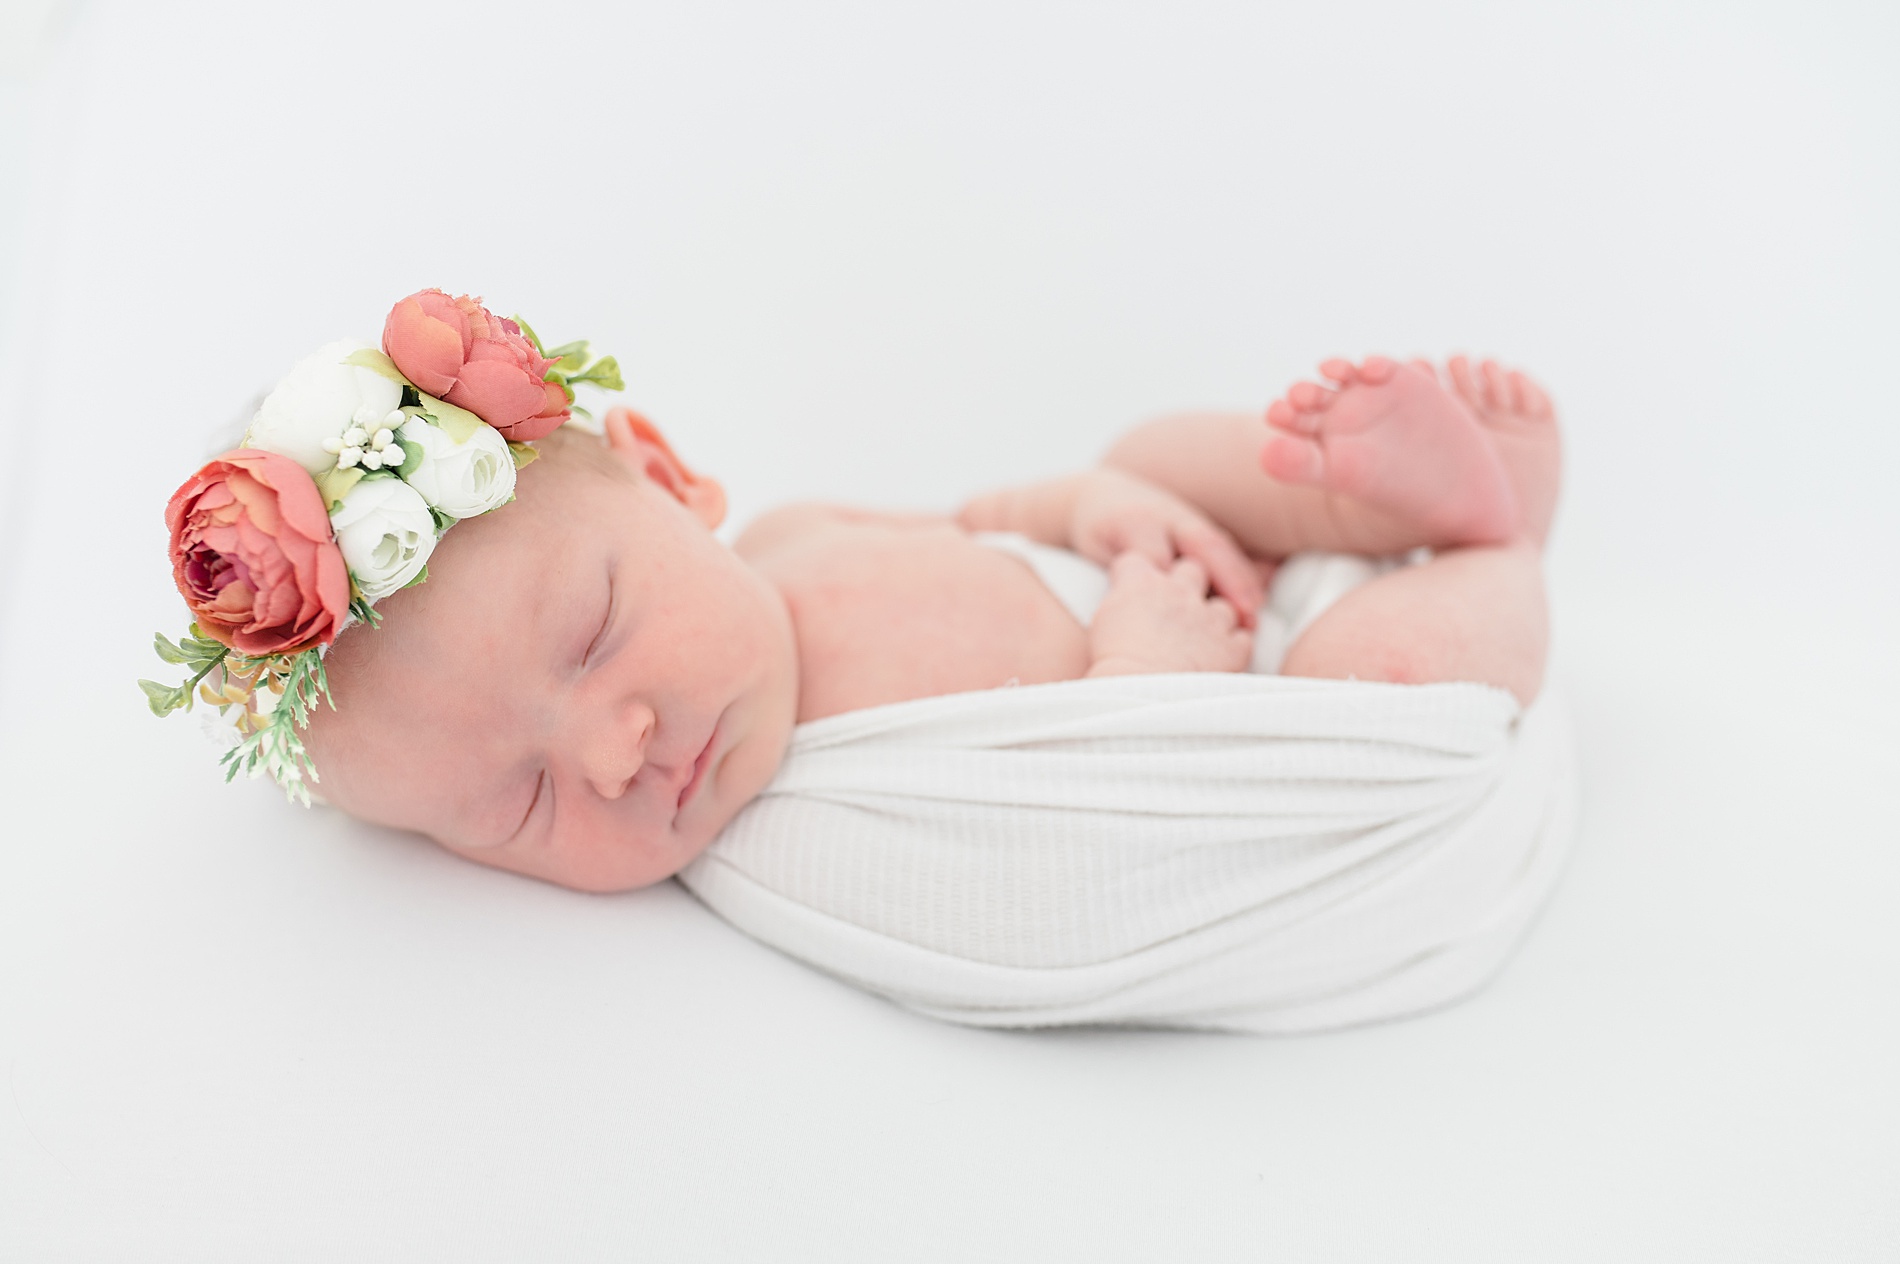 sleeping newborn portraits | The Importance of Documenting Your Baby's First Year by Dallas Newborn Photographer Lindsey Dutton Photography